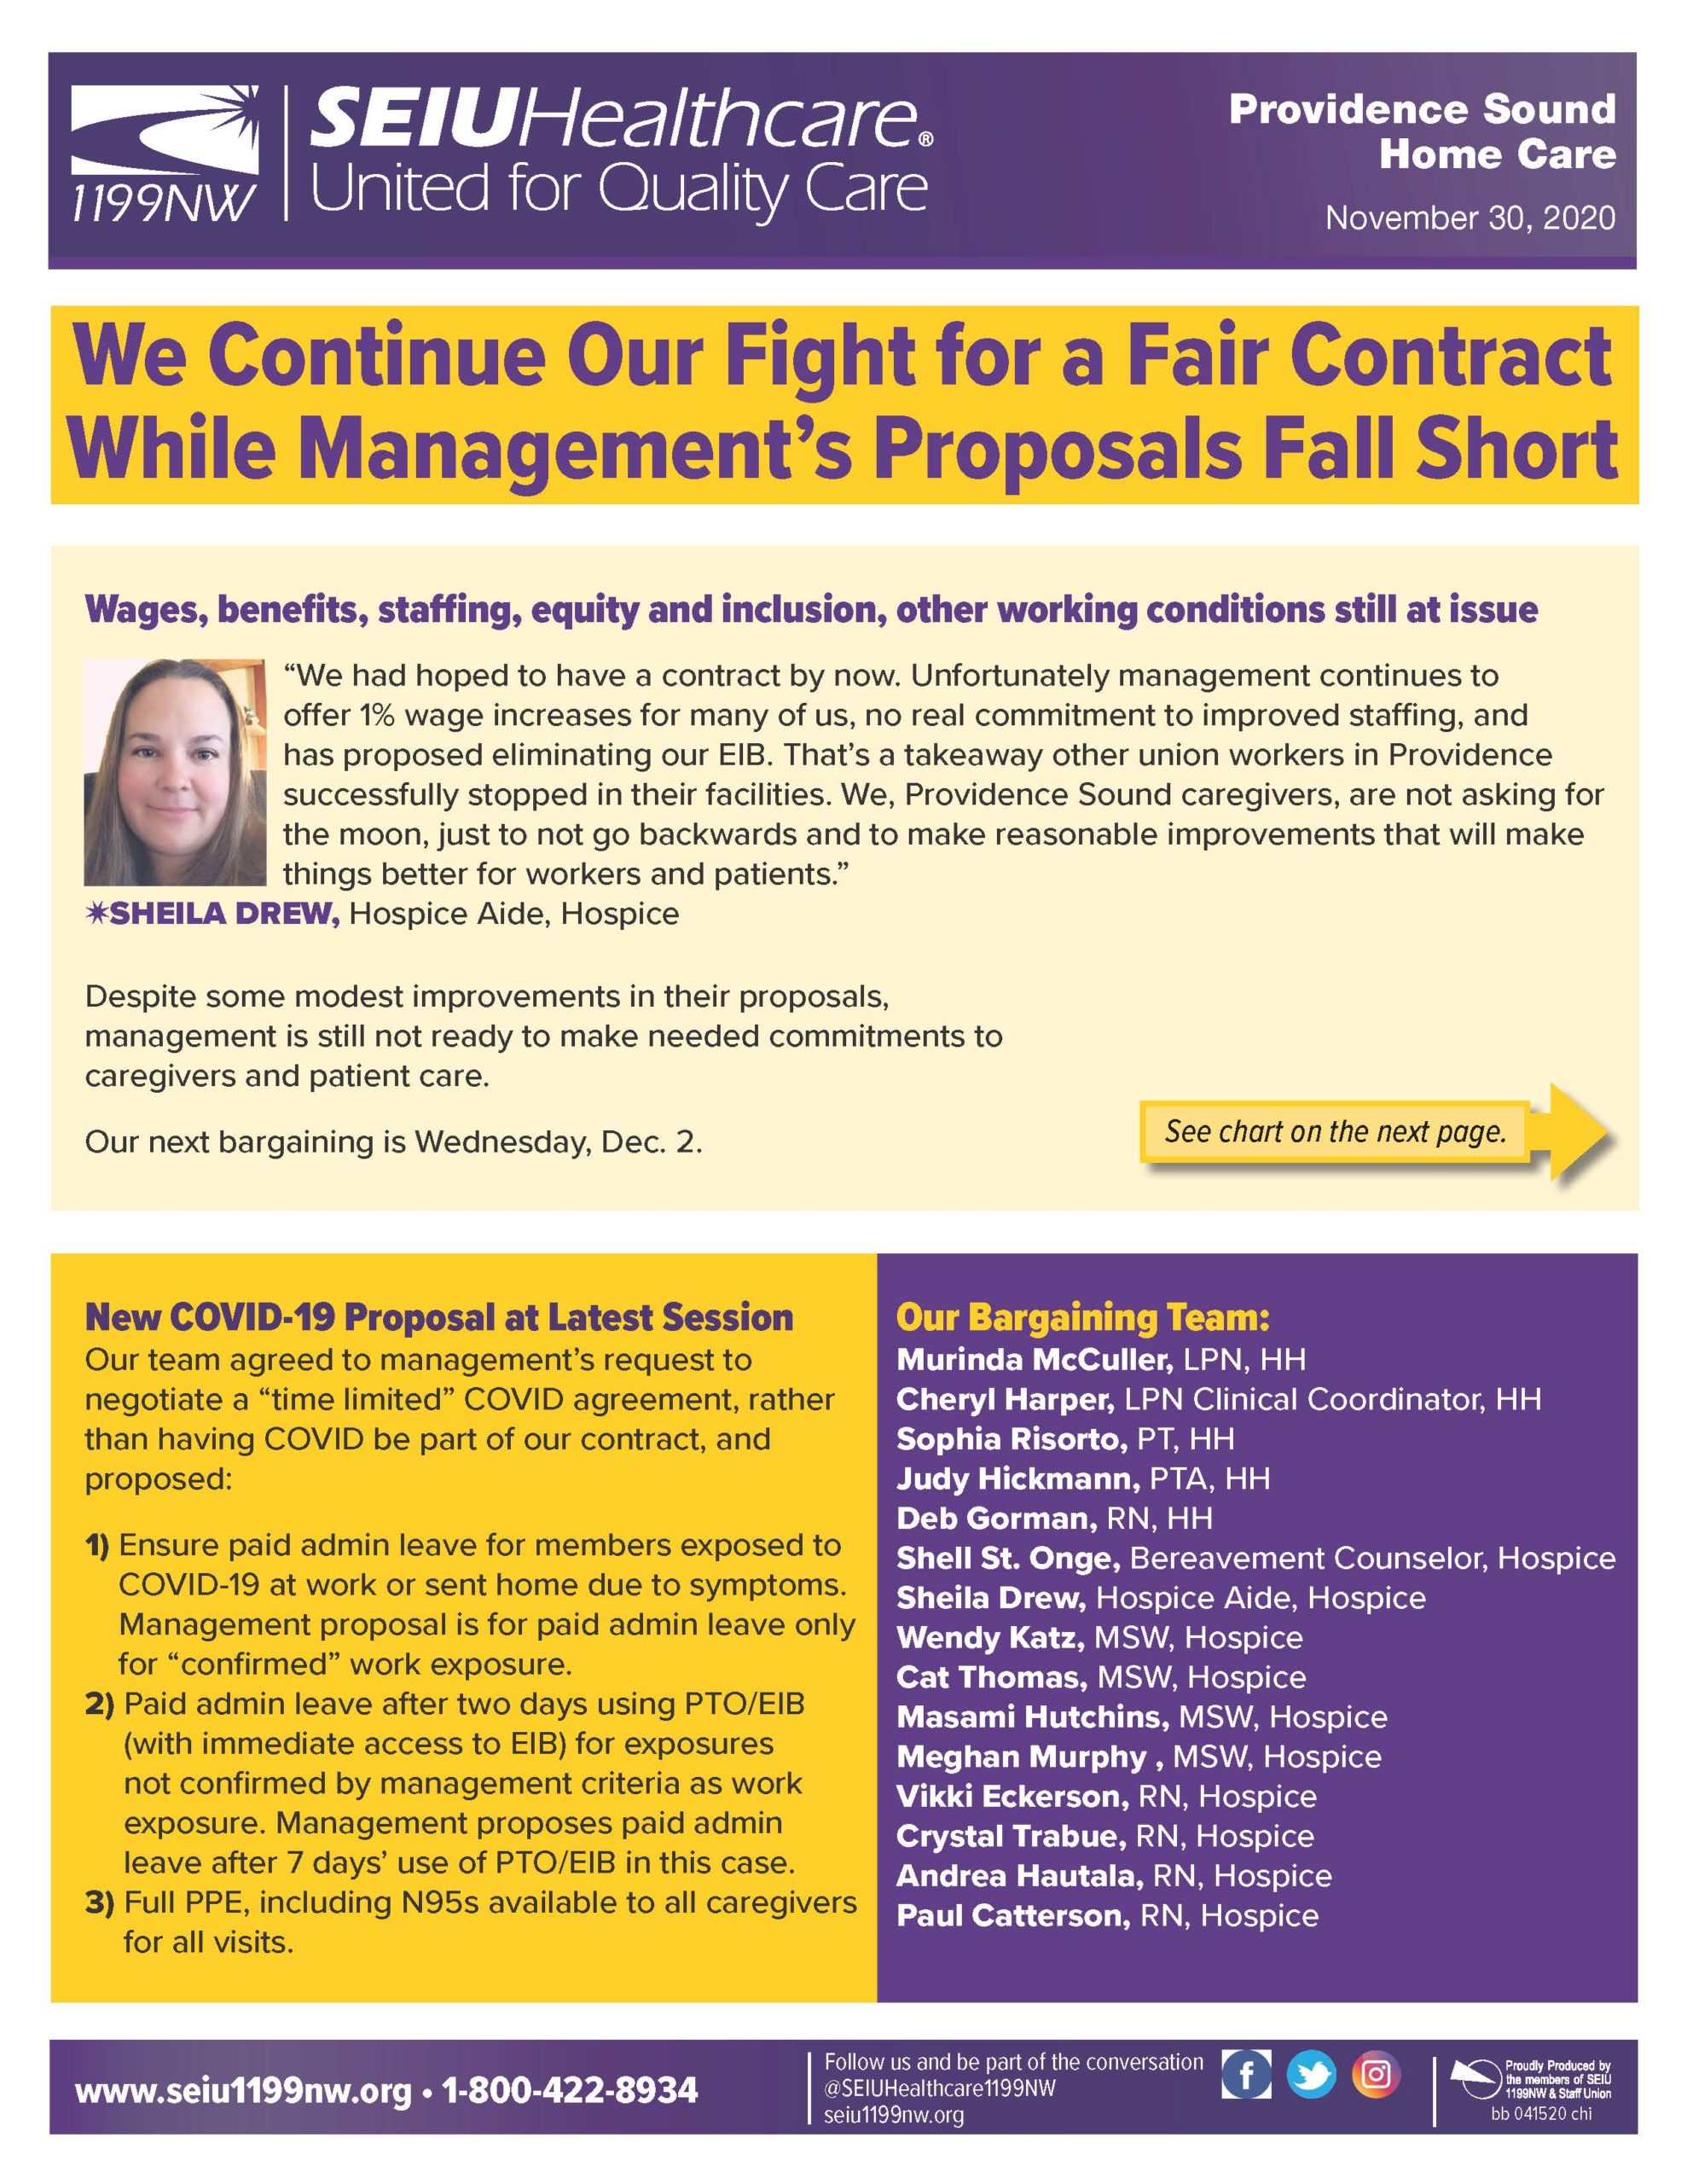 We Continue Our Fight for a Fair Contract While Management’s Proposals Fall Short